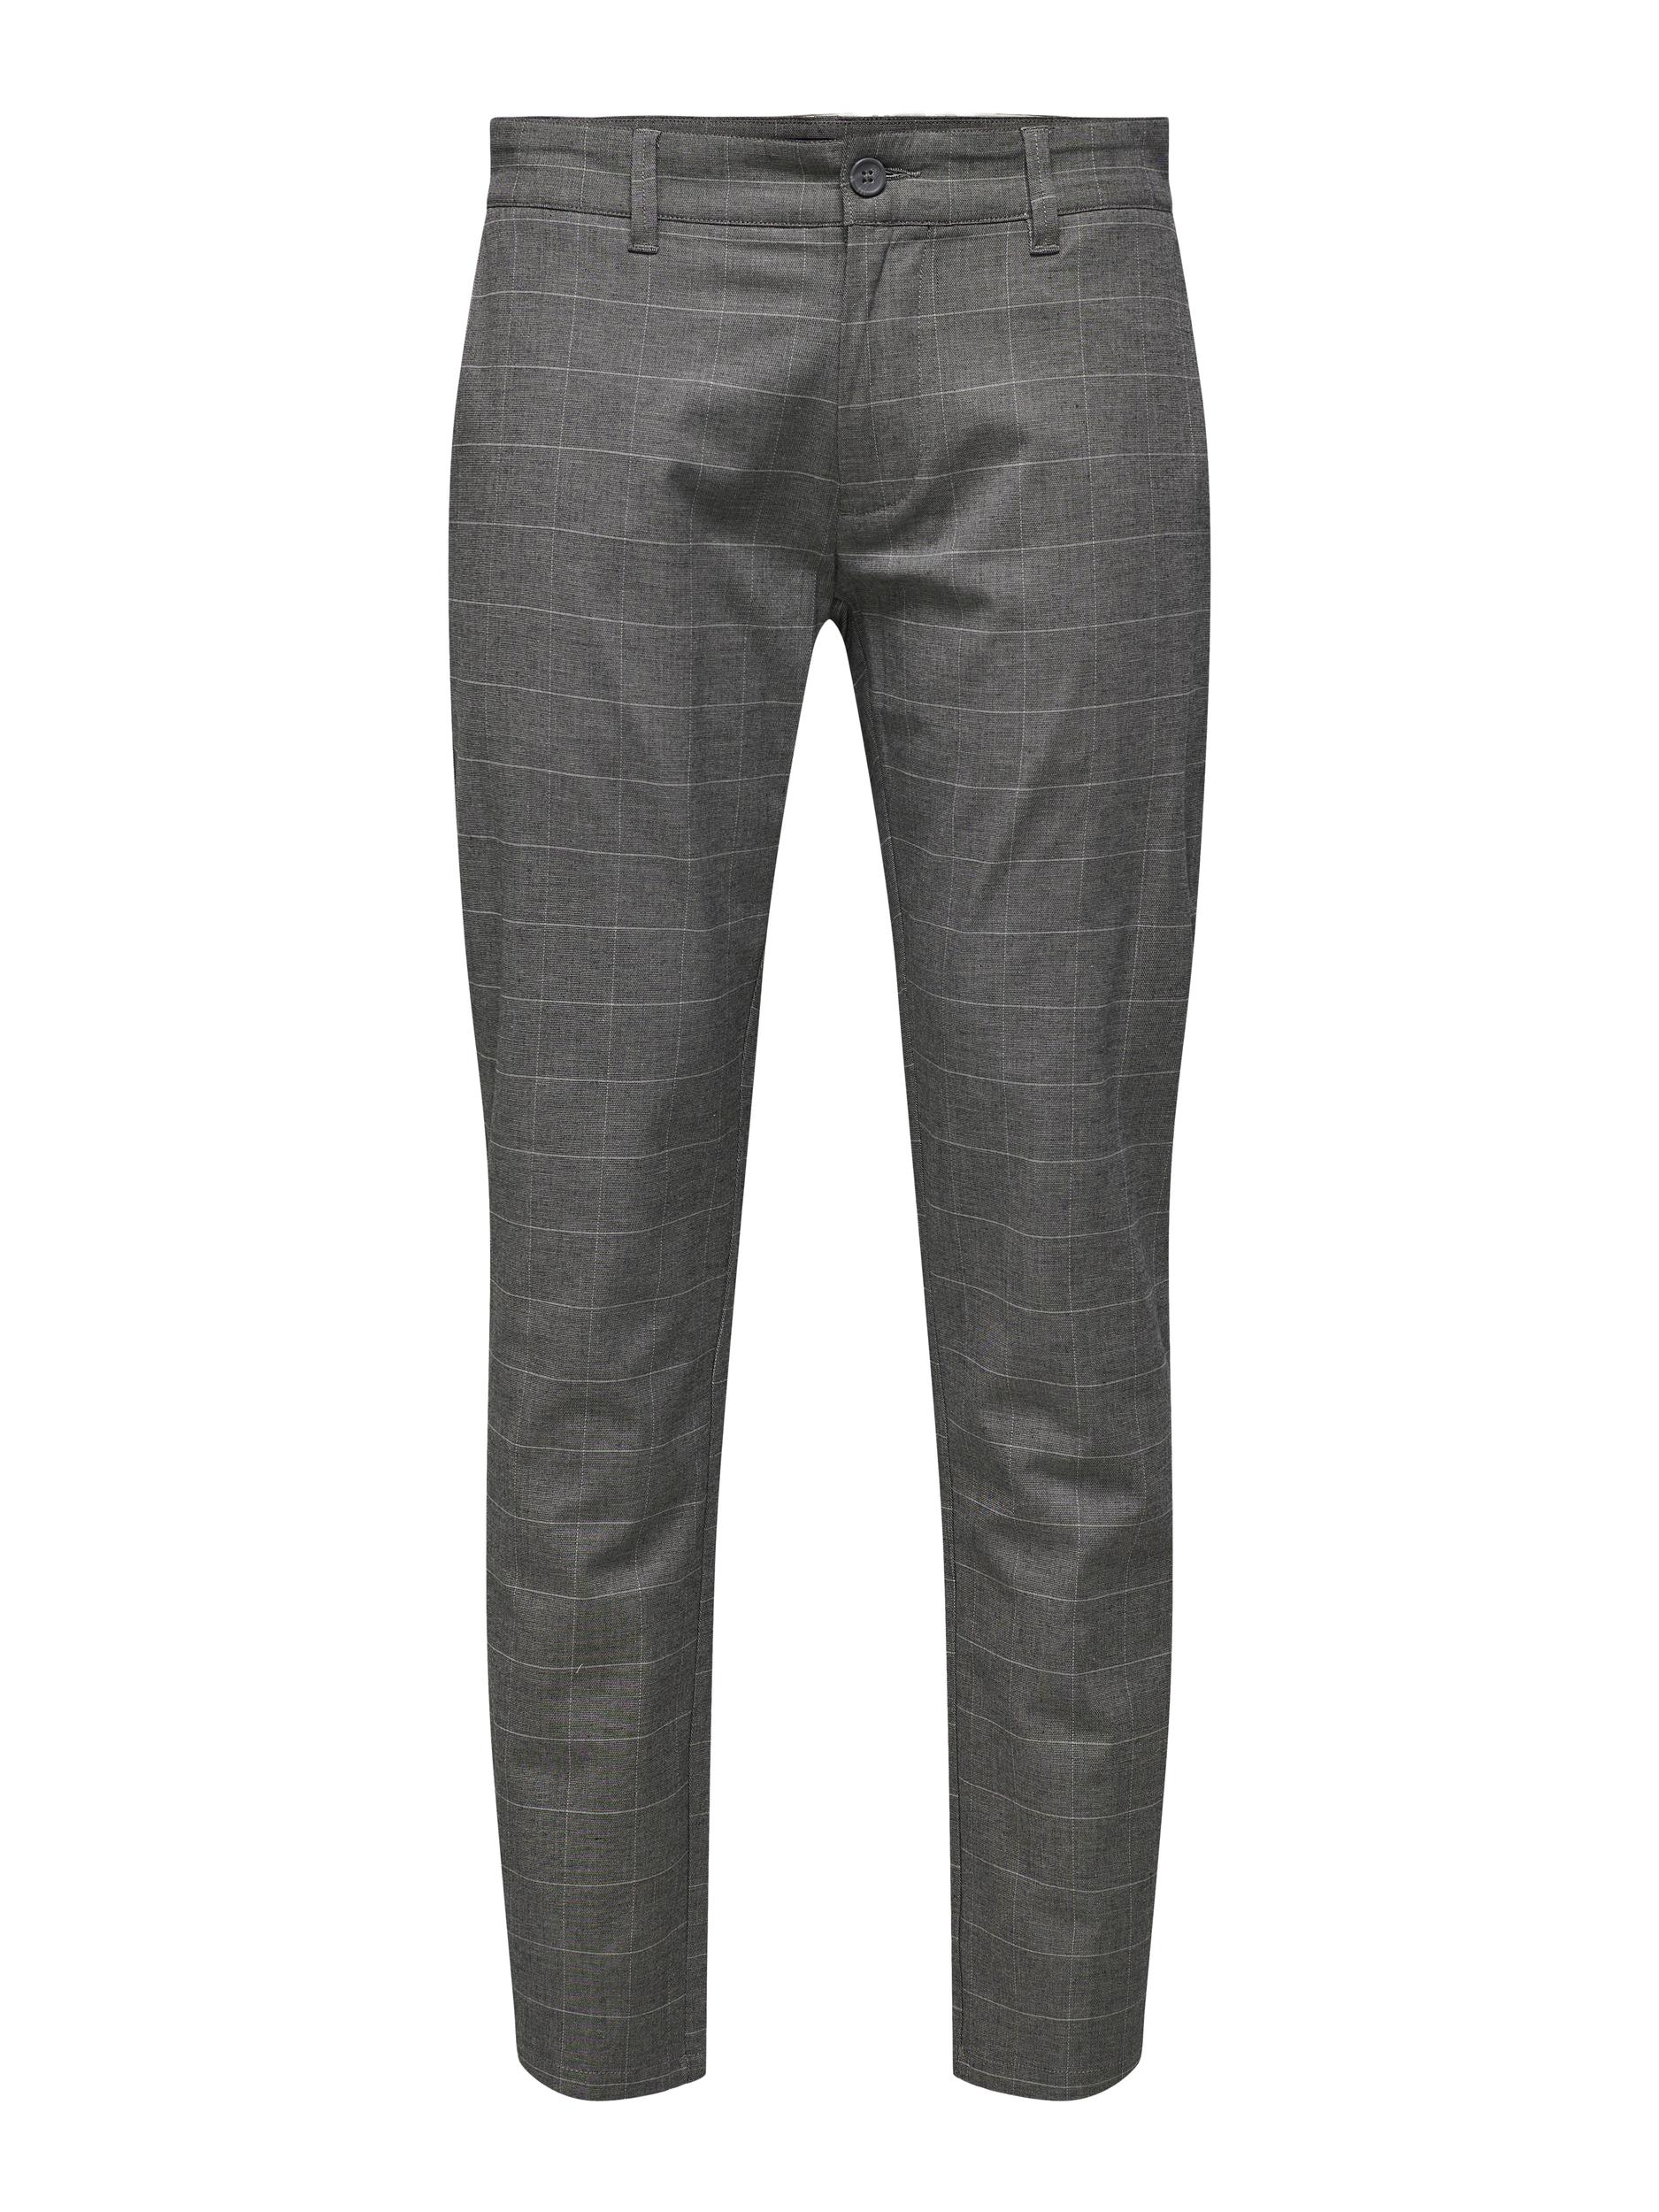 ONLY Mark Check Chinos, Grey Pinstripe, W31/L32